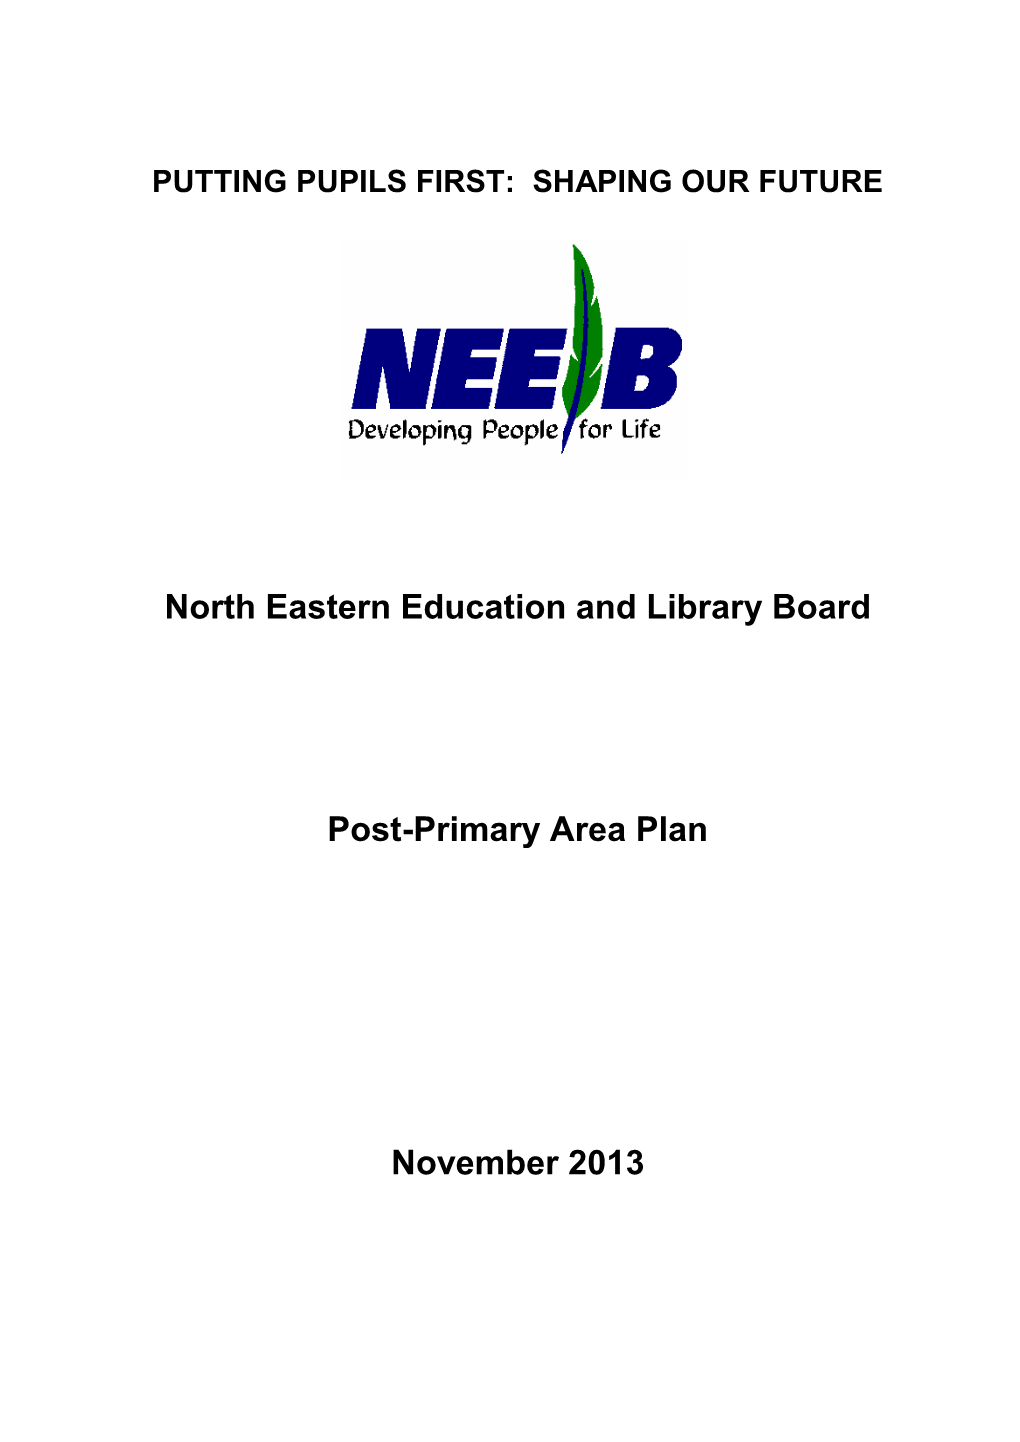 North Eastern Education and Library Board Post-Primary Area Plan